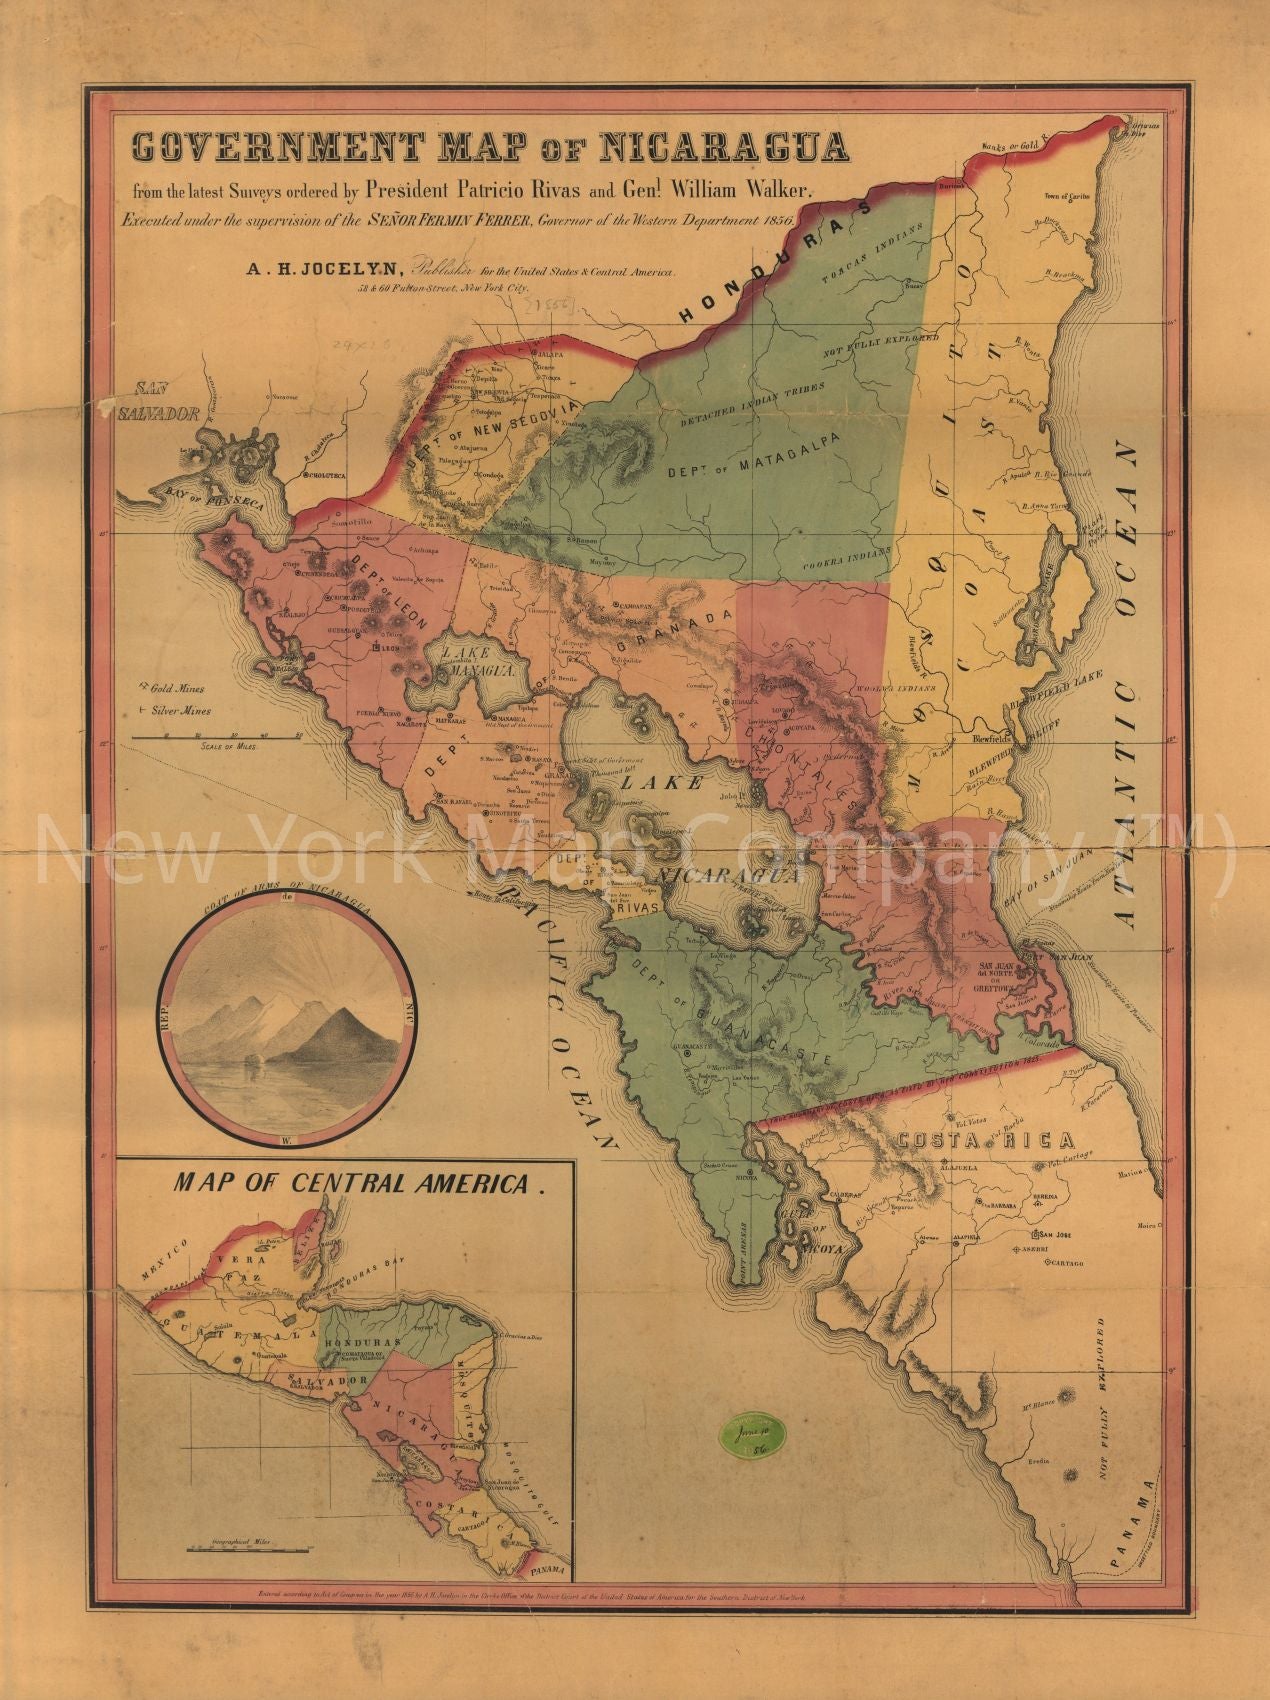 1856 map Government map of Nicaragua: from the latest surveys ordered by President Patricio Rivas and Genl. William Walker ; executed under the supervision of the Señor Fermín Ferrer, Governor of the Western Department, 1856. Map of Central America. Map